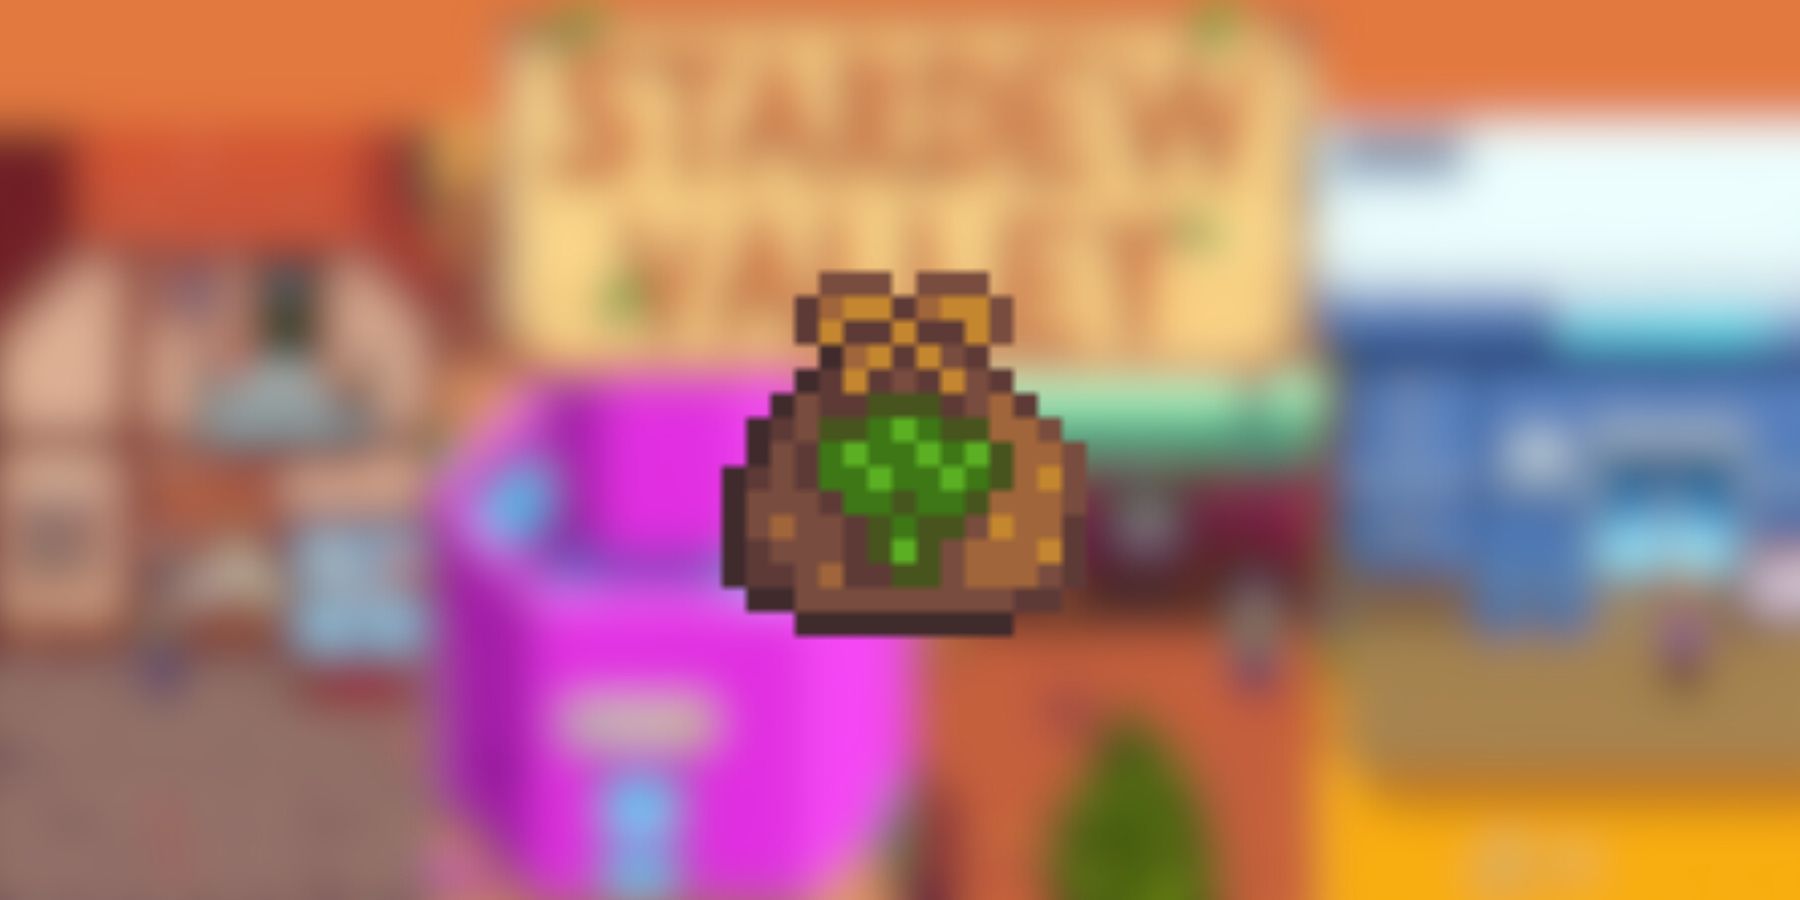 broccoli seed in stardew valley 1.6.